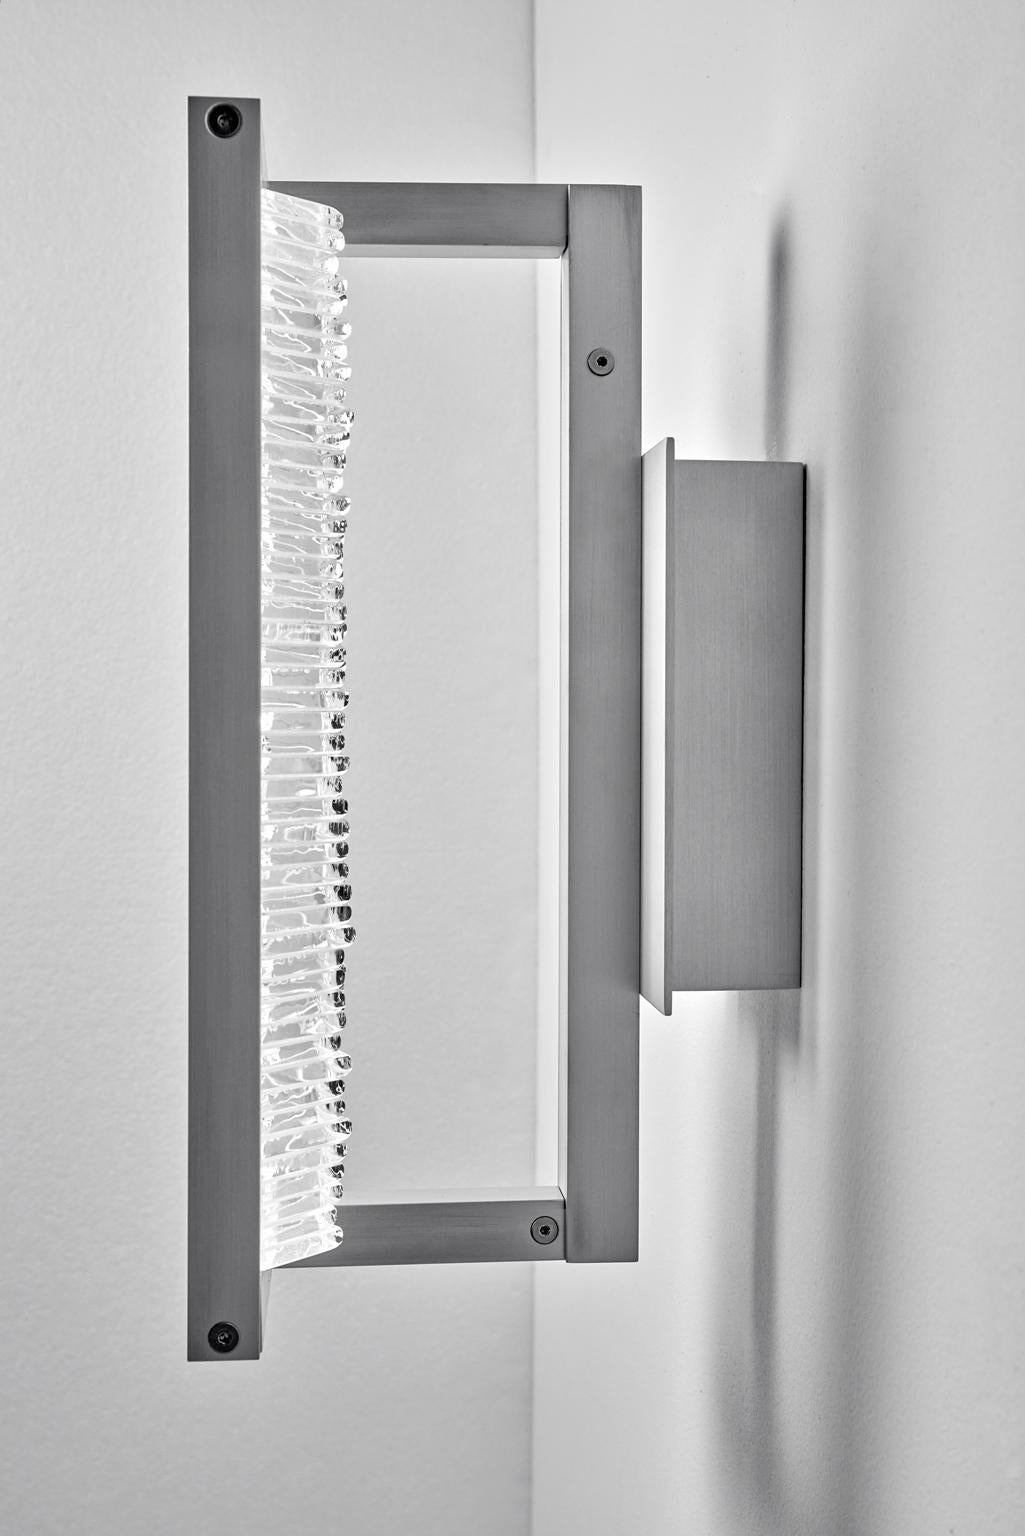 Designed and created by Sidney Hutter Glass & Light, this wall sconce has an ultra contemporary style that looks good in any environment. The sconce is framed with anodized aluminum. By laminating clear glass pieces together in a horizontal pattern